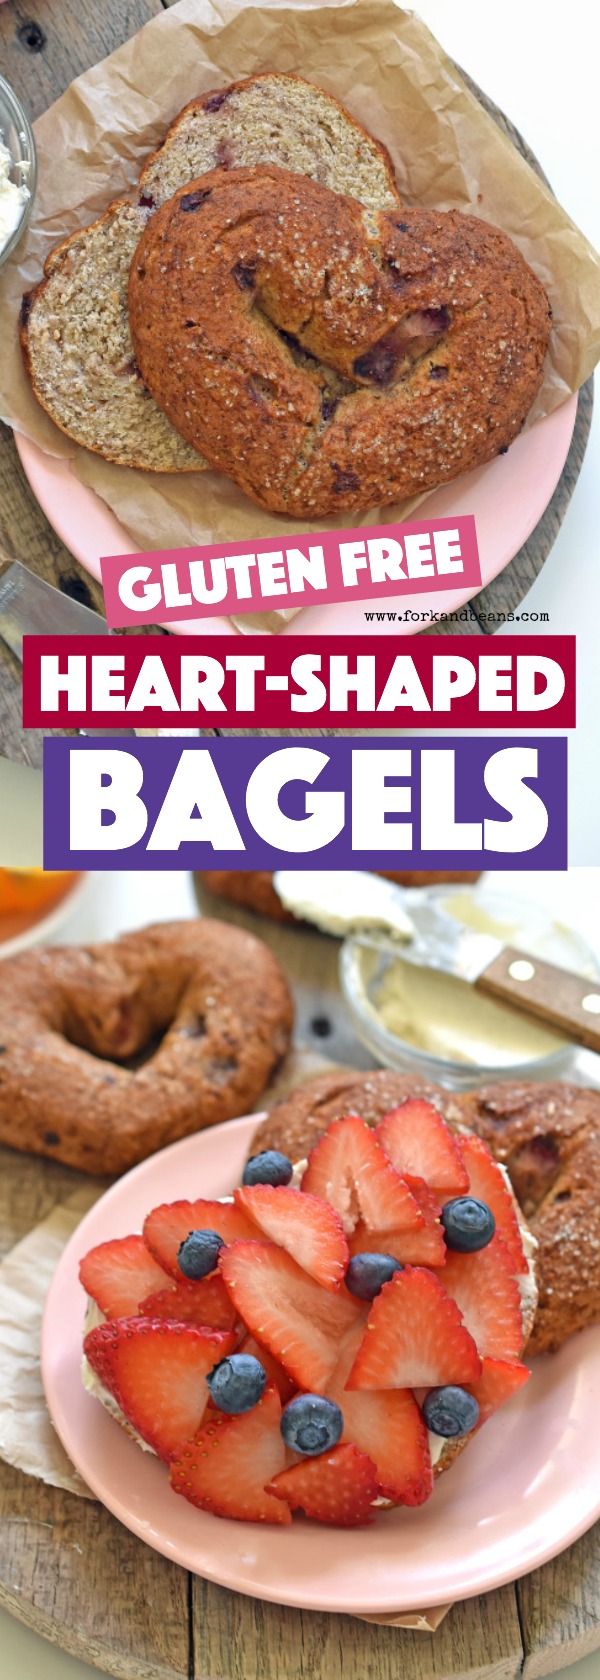 Say I Love You at the breakfast table by making your family gluten free heart shaped bagels in the morning!